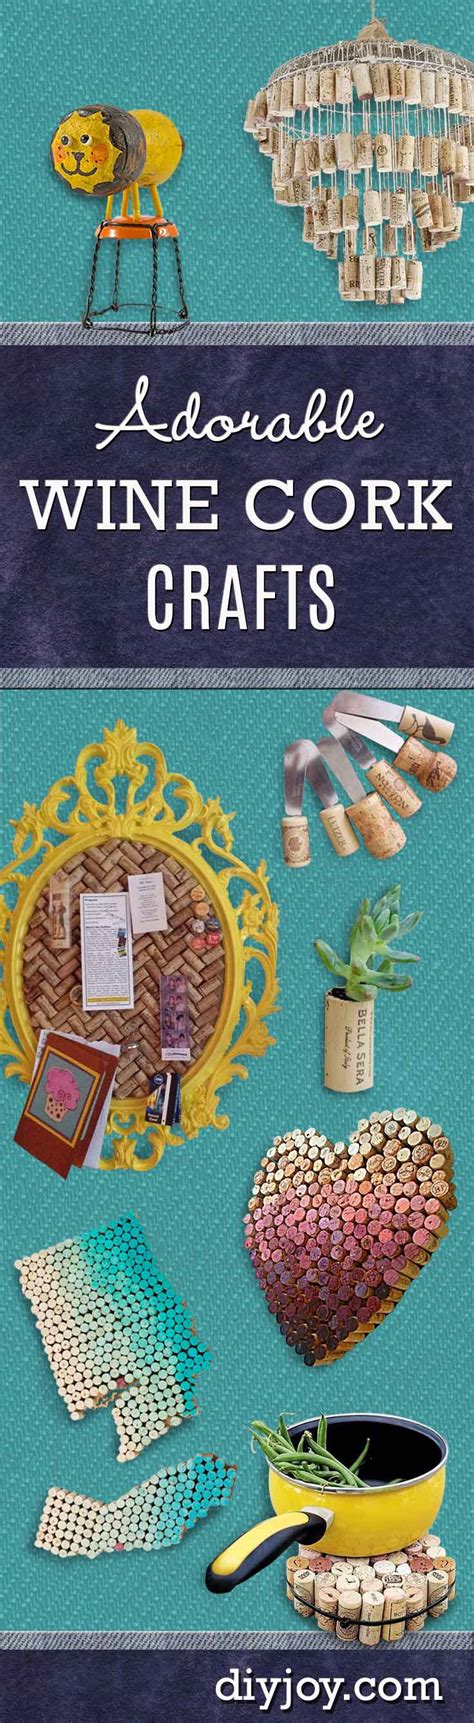 50 Wine Cork Crafts Diy Decor And Ts Made From Wine Cork